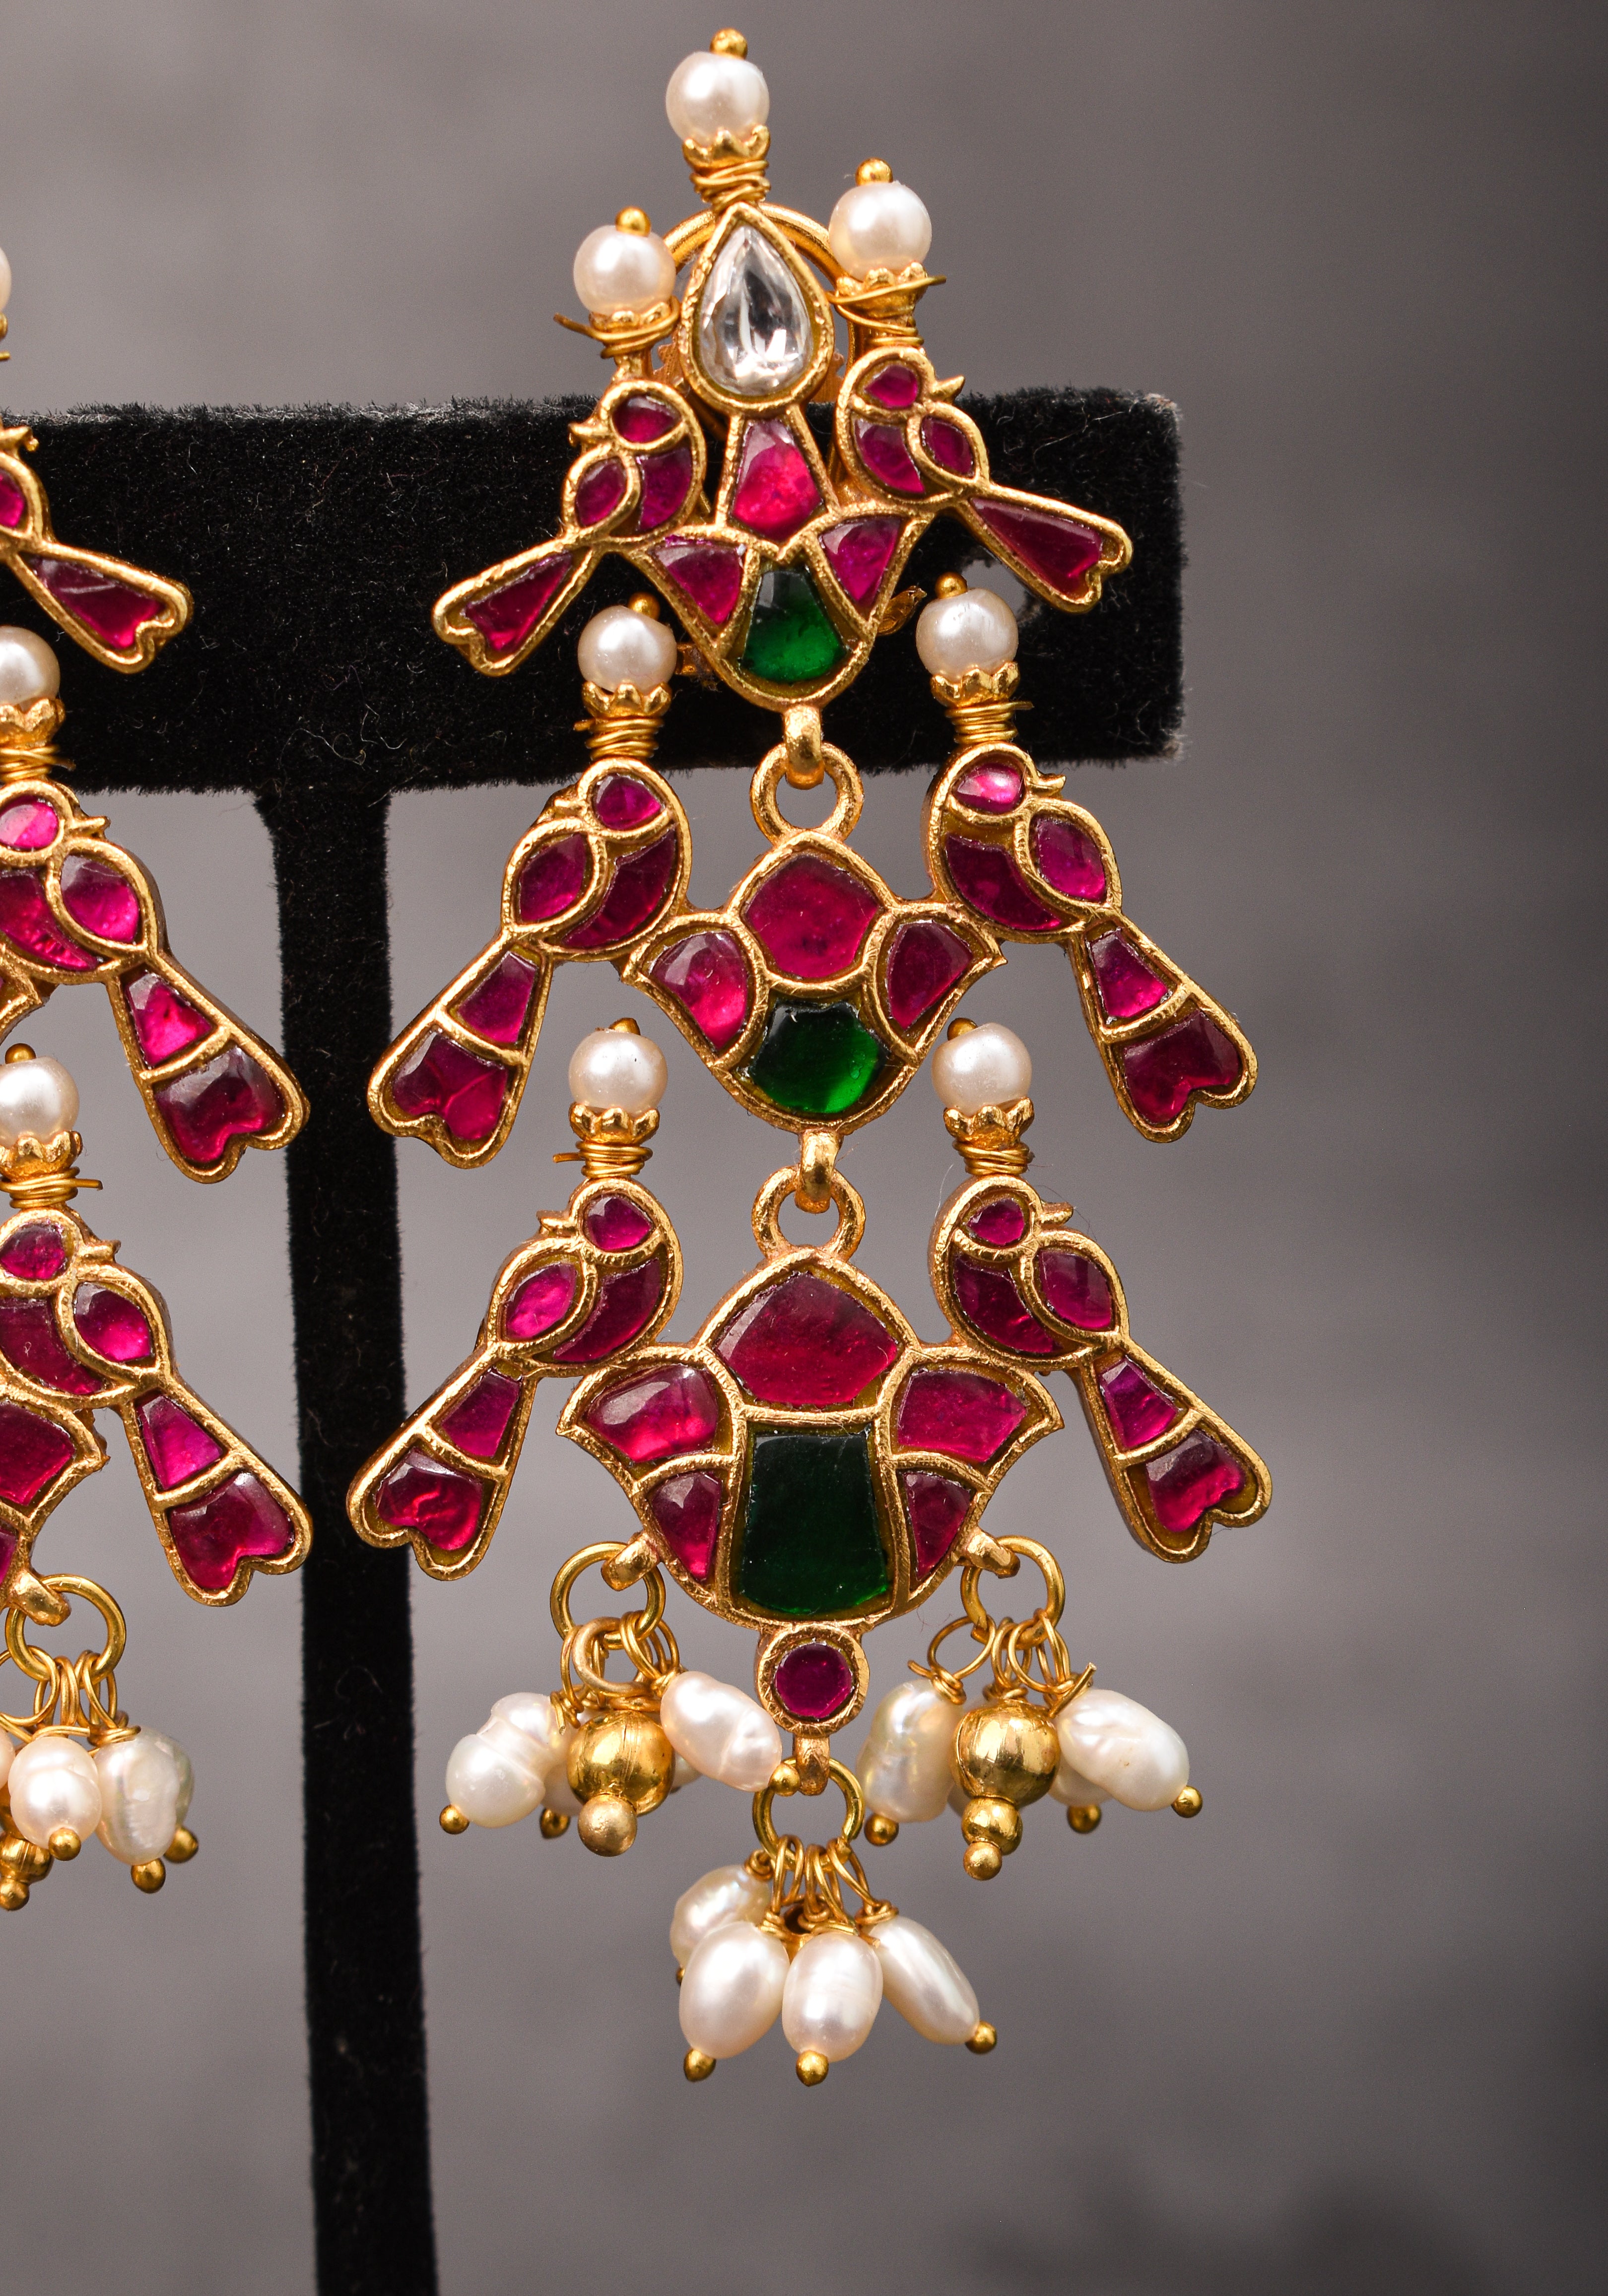 2.75" Layered Pink & Green Stone Peacock Earrings with Dangling White Beads